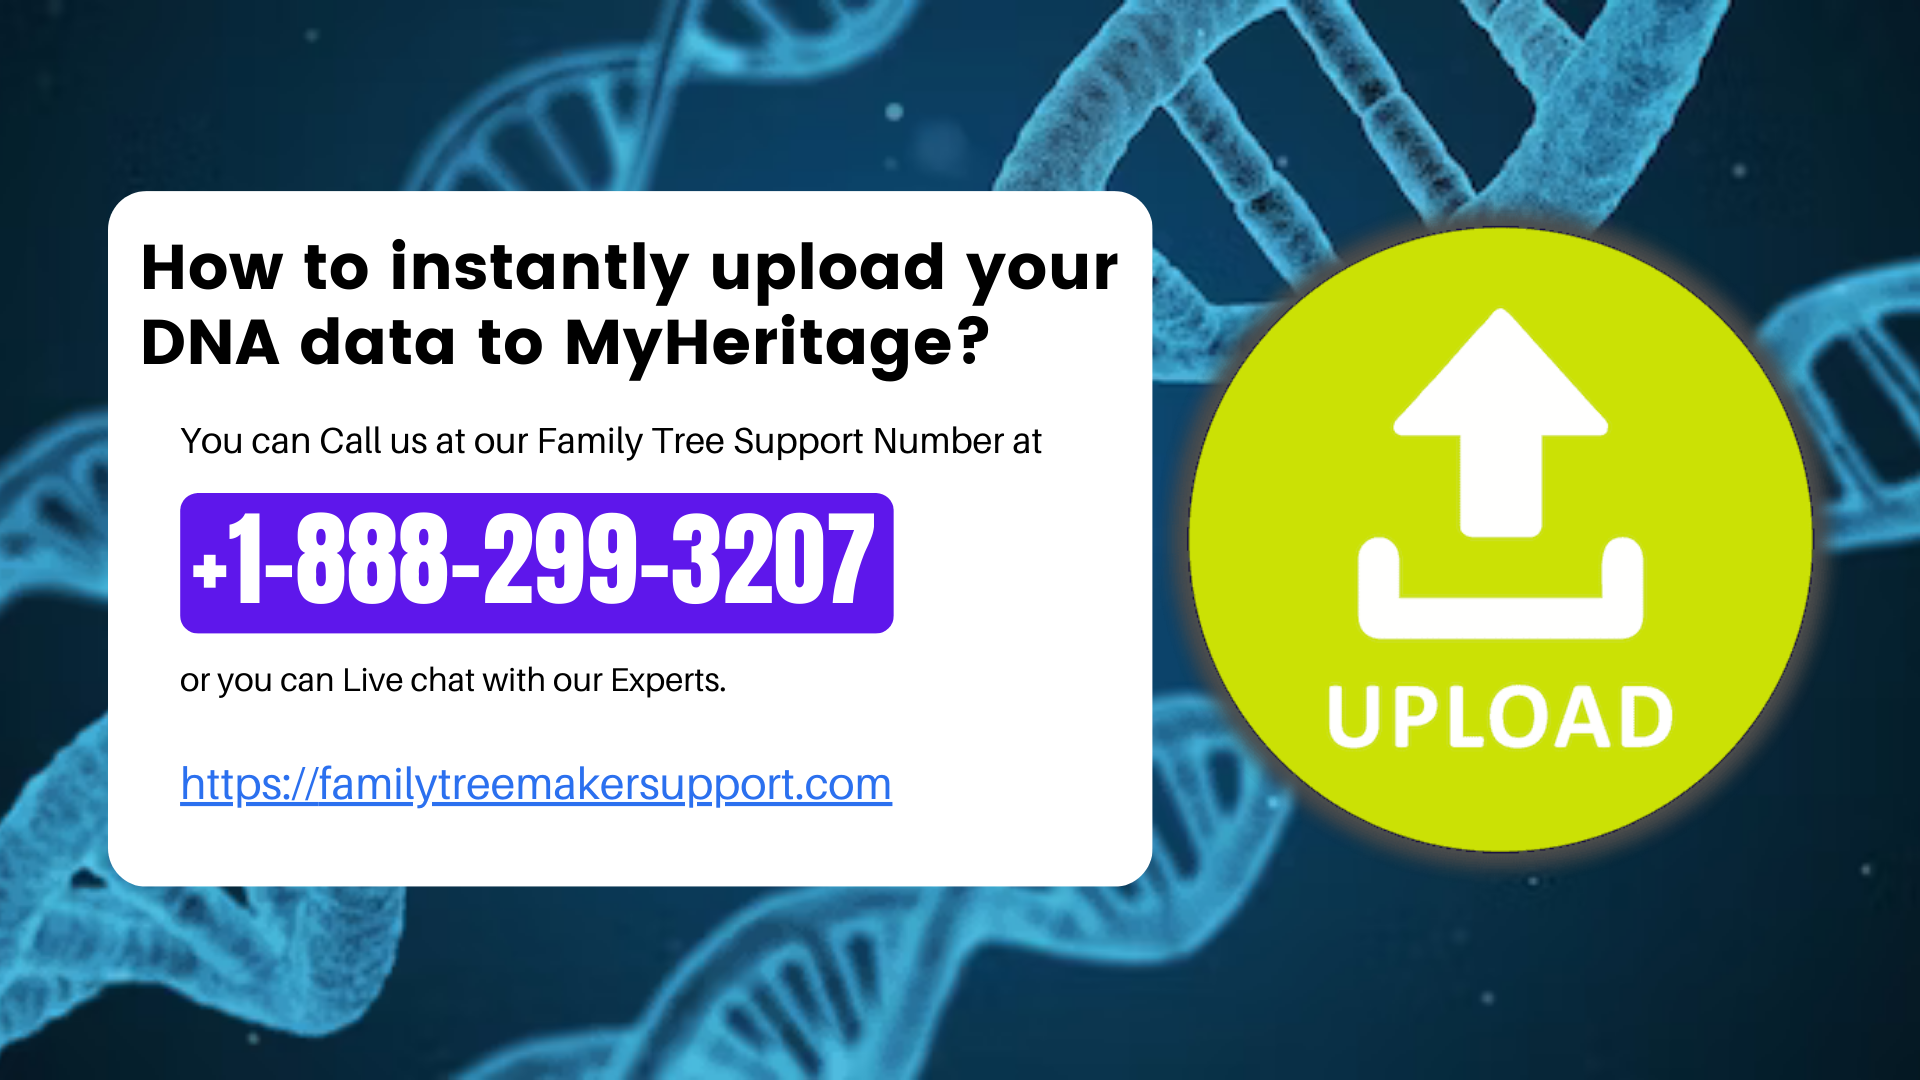 How to instantly upload your DNA data to MyHeritage